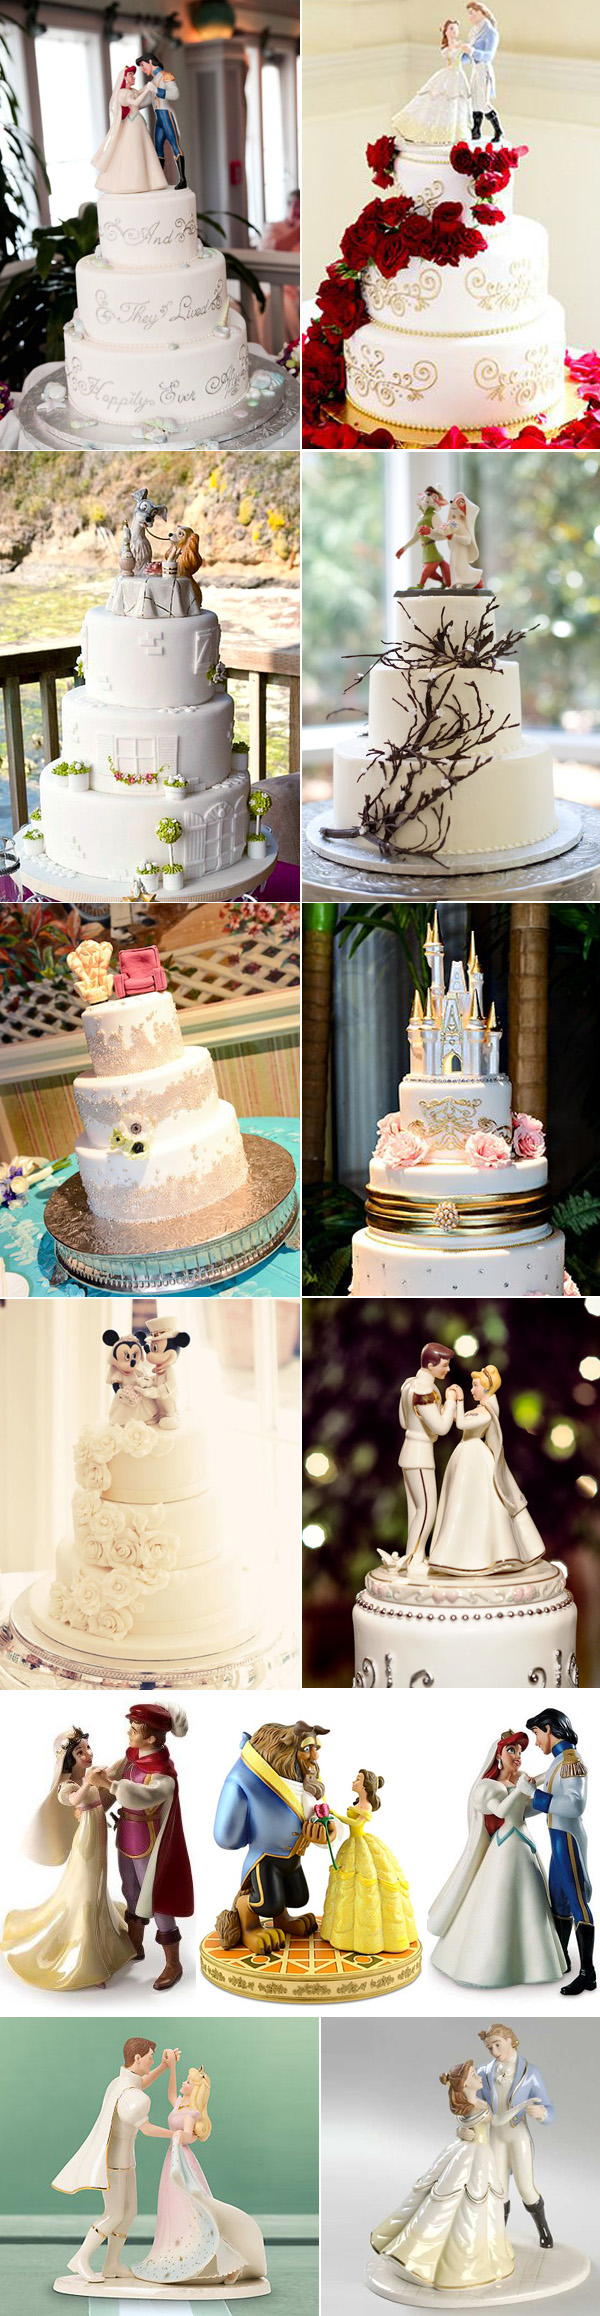 5,378 Funny Wedding Cake Images, Stock Photos, 3D objects, & Vectors |  Shutterstock